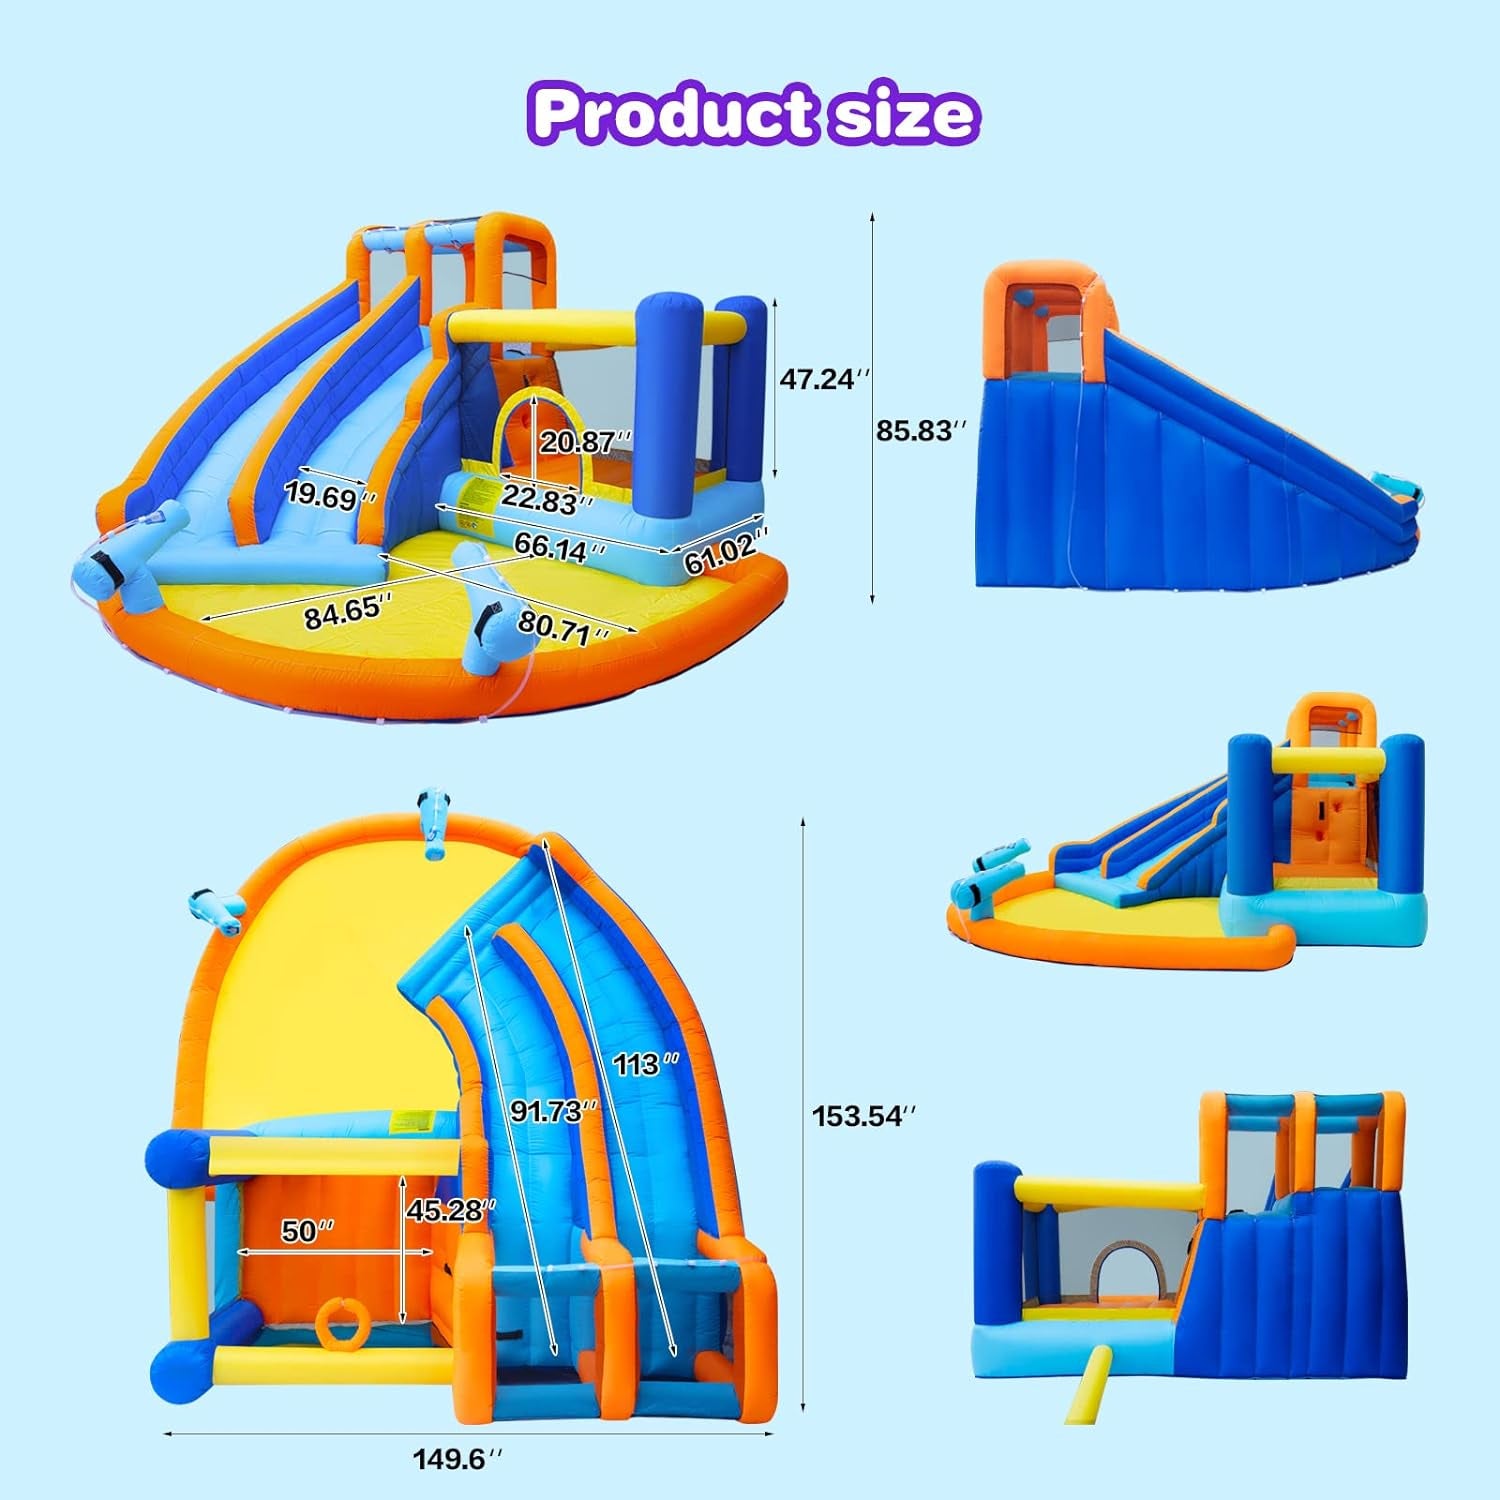 Inflatable Water Slide Bounce House,Giant Water Park, Double Slide Bouncer Castle W/Splash Pool, Jump Area, Climbing Wall, 550W Air Blower for Kids Backyard Indoor Outdoor Use,Free Water Gun